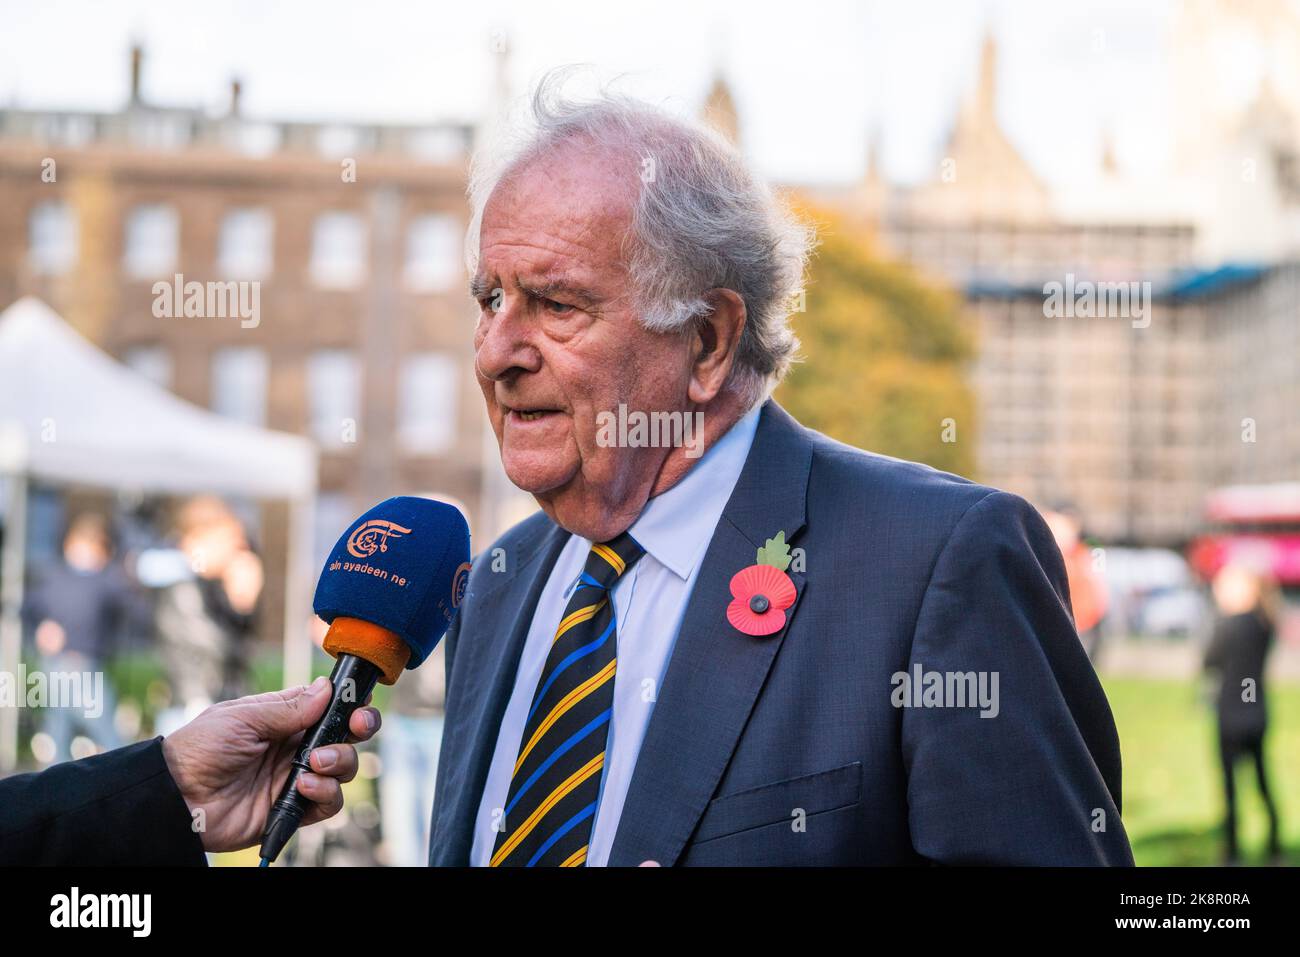 London UK. 24 October 2022 . Sir Roger Gale Conservative  Member of Parliament  North Thanet is interviewed on college green on the day Rishi Sunak won the nomination for Leader of the Conservative Party and becomes the new Prime Minister after Liz Truss resigned . Sir Roger Gale has criticised the conditions at Manston immigration centre Kent. Credit: amer ghazzal/Alamy Live News Stock Photo